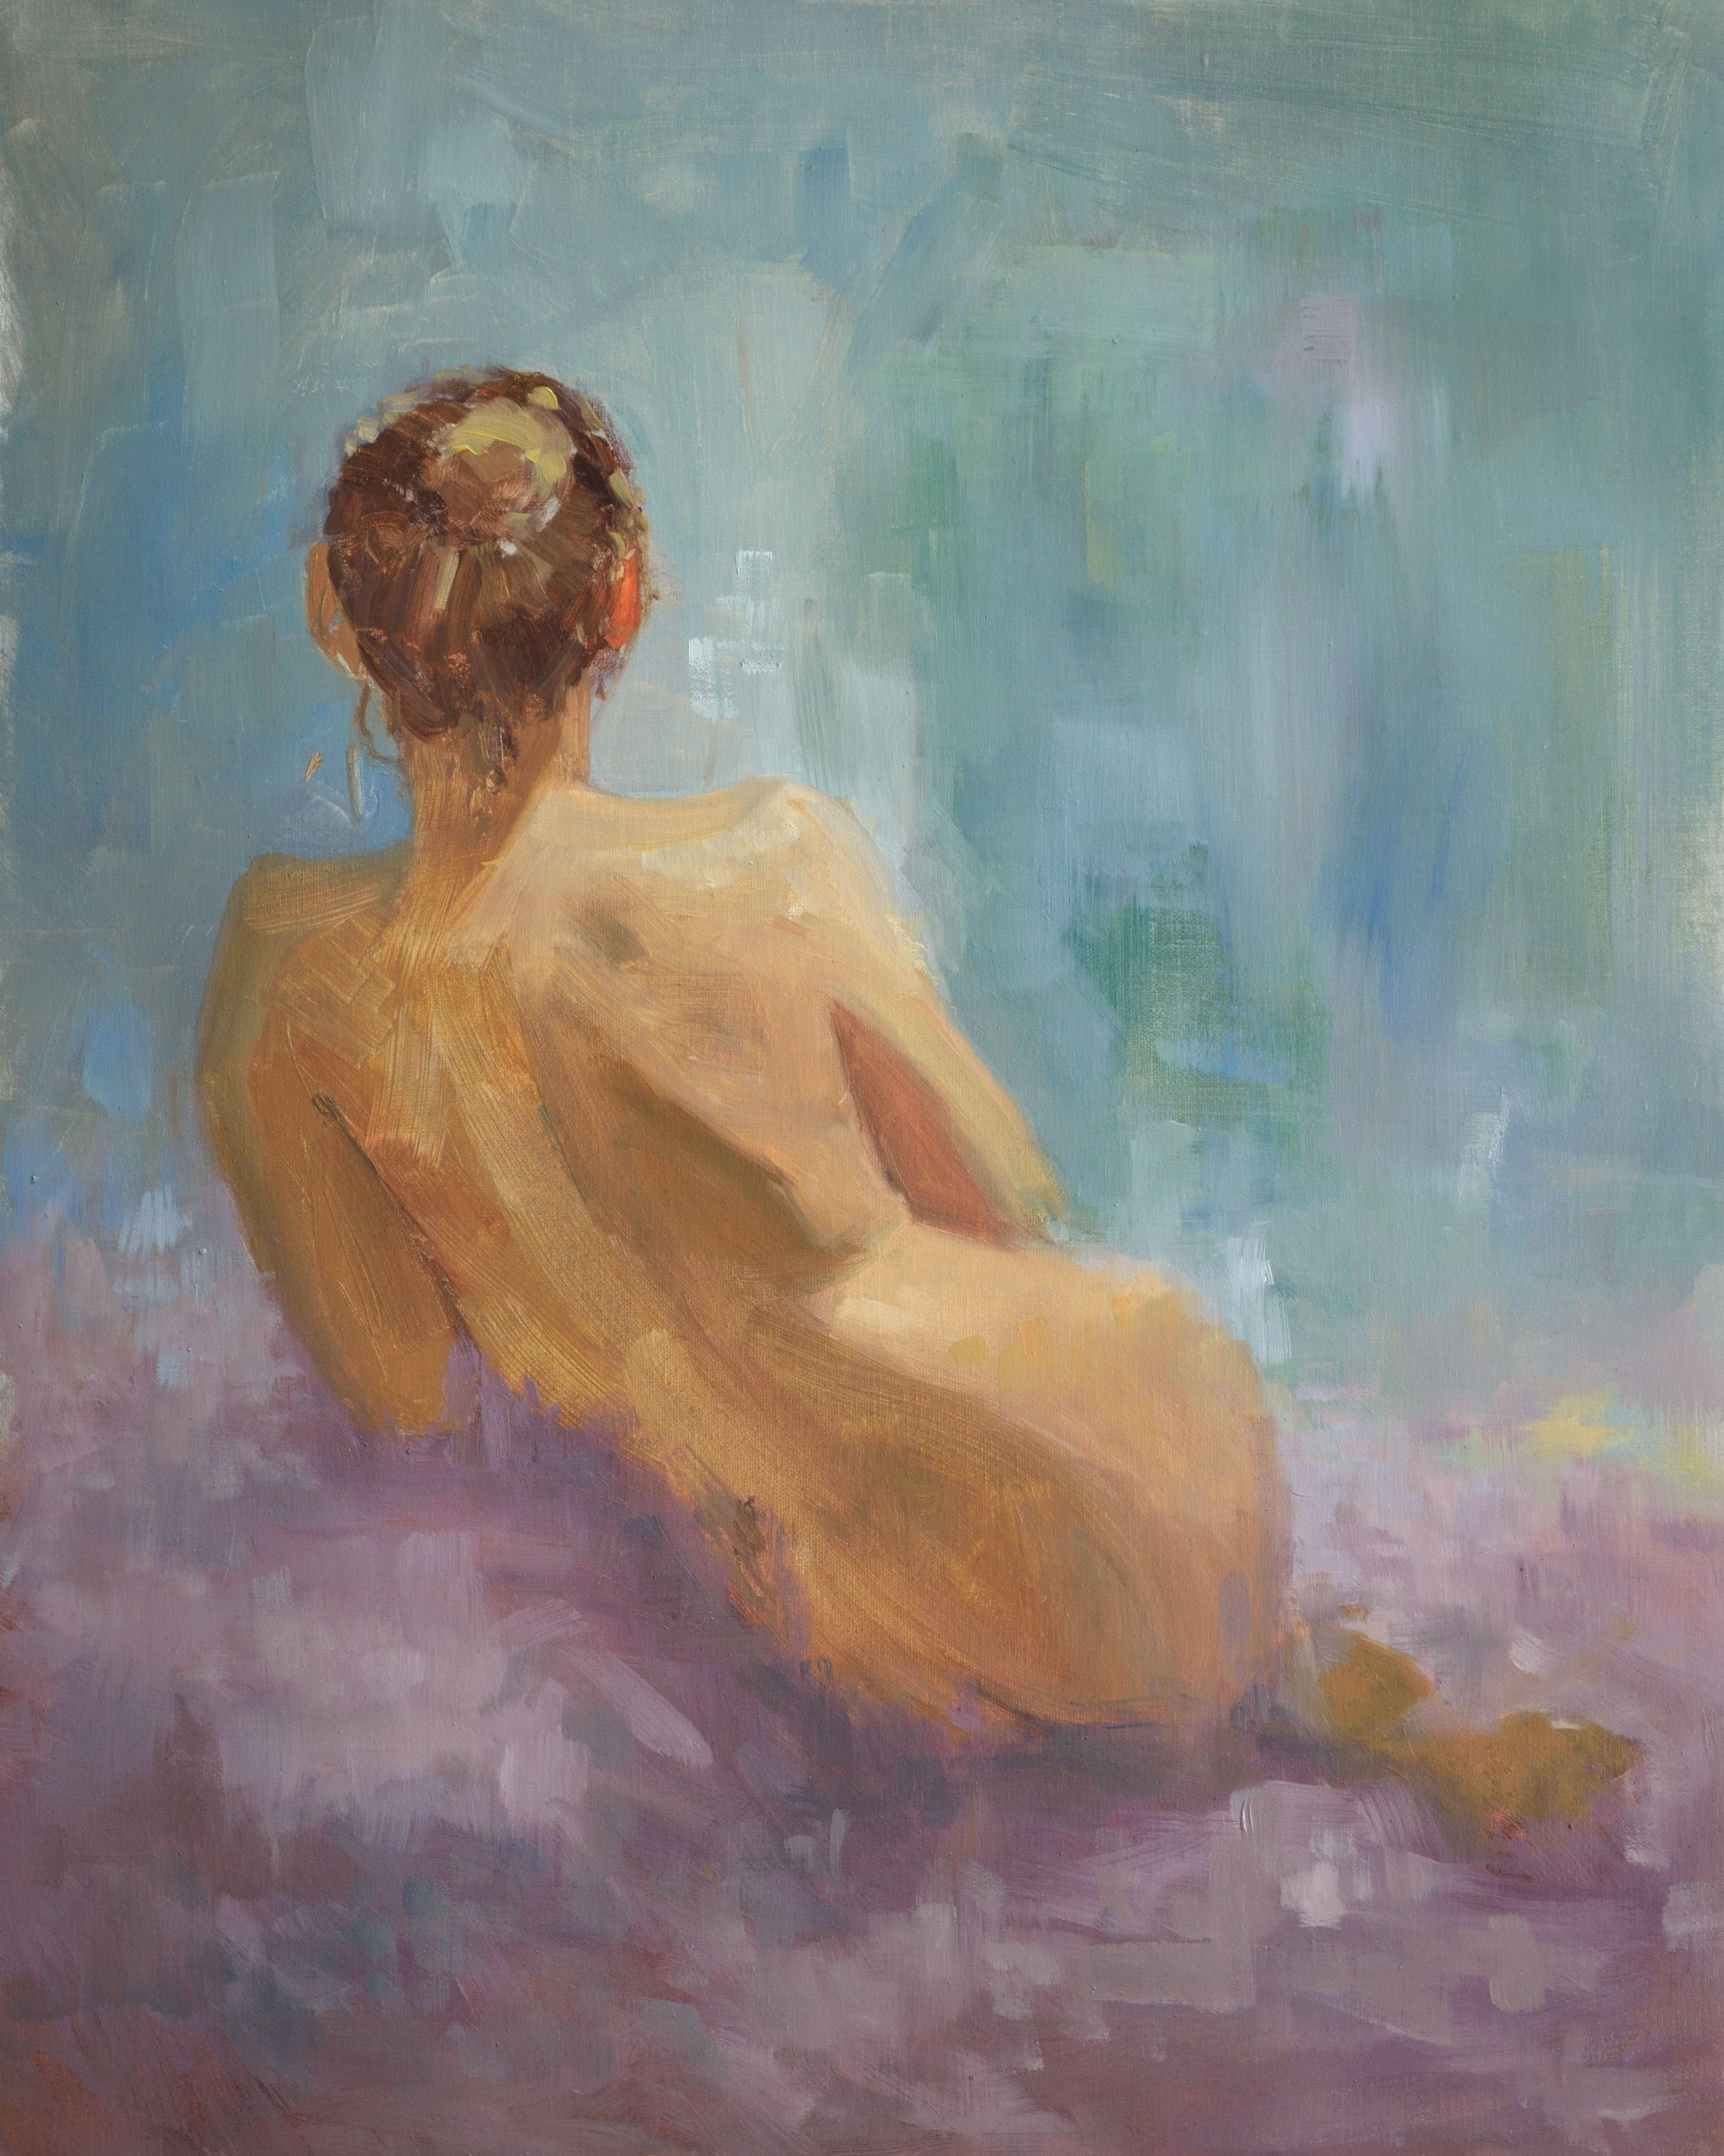 Timon Sloane Figurative Painting - Waiting a Moment, Painting, Oil on Canvas